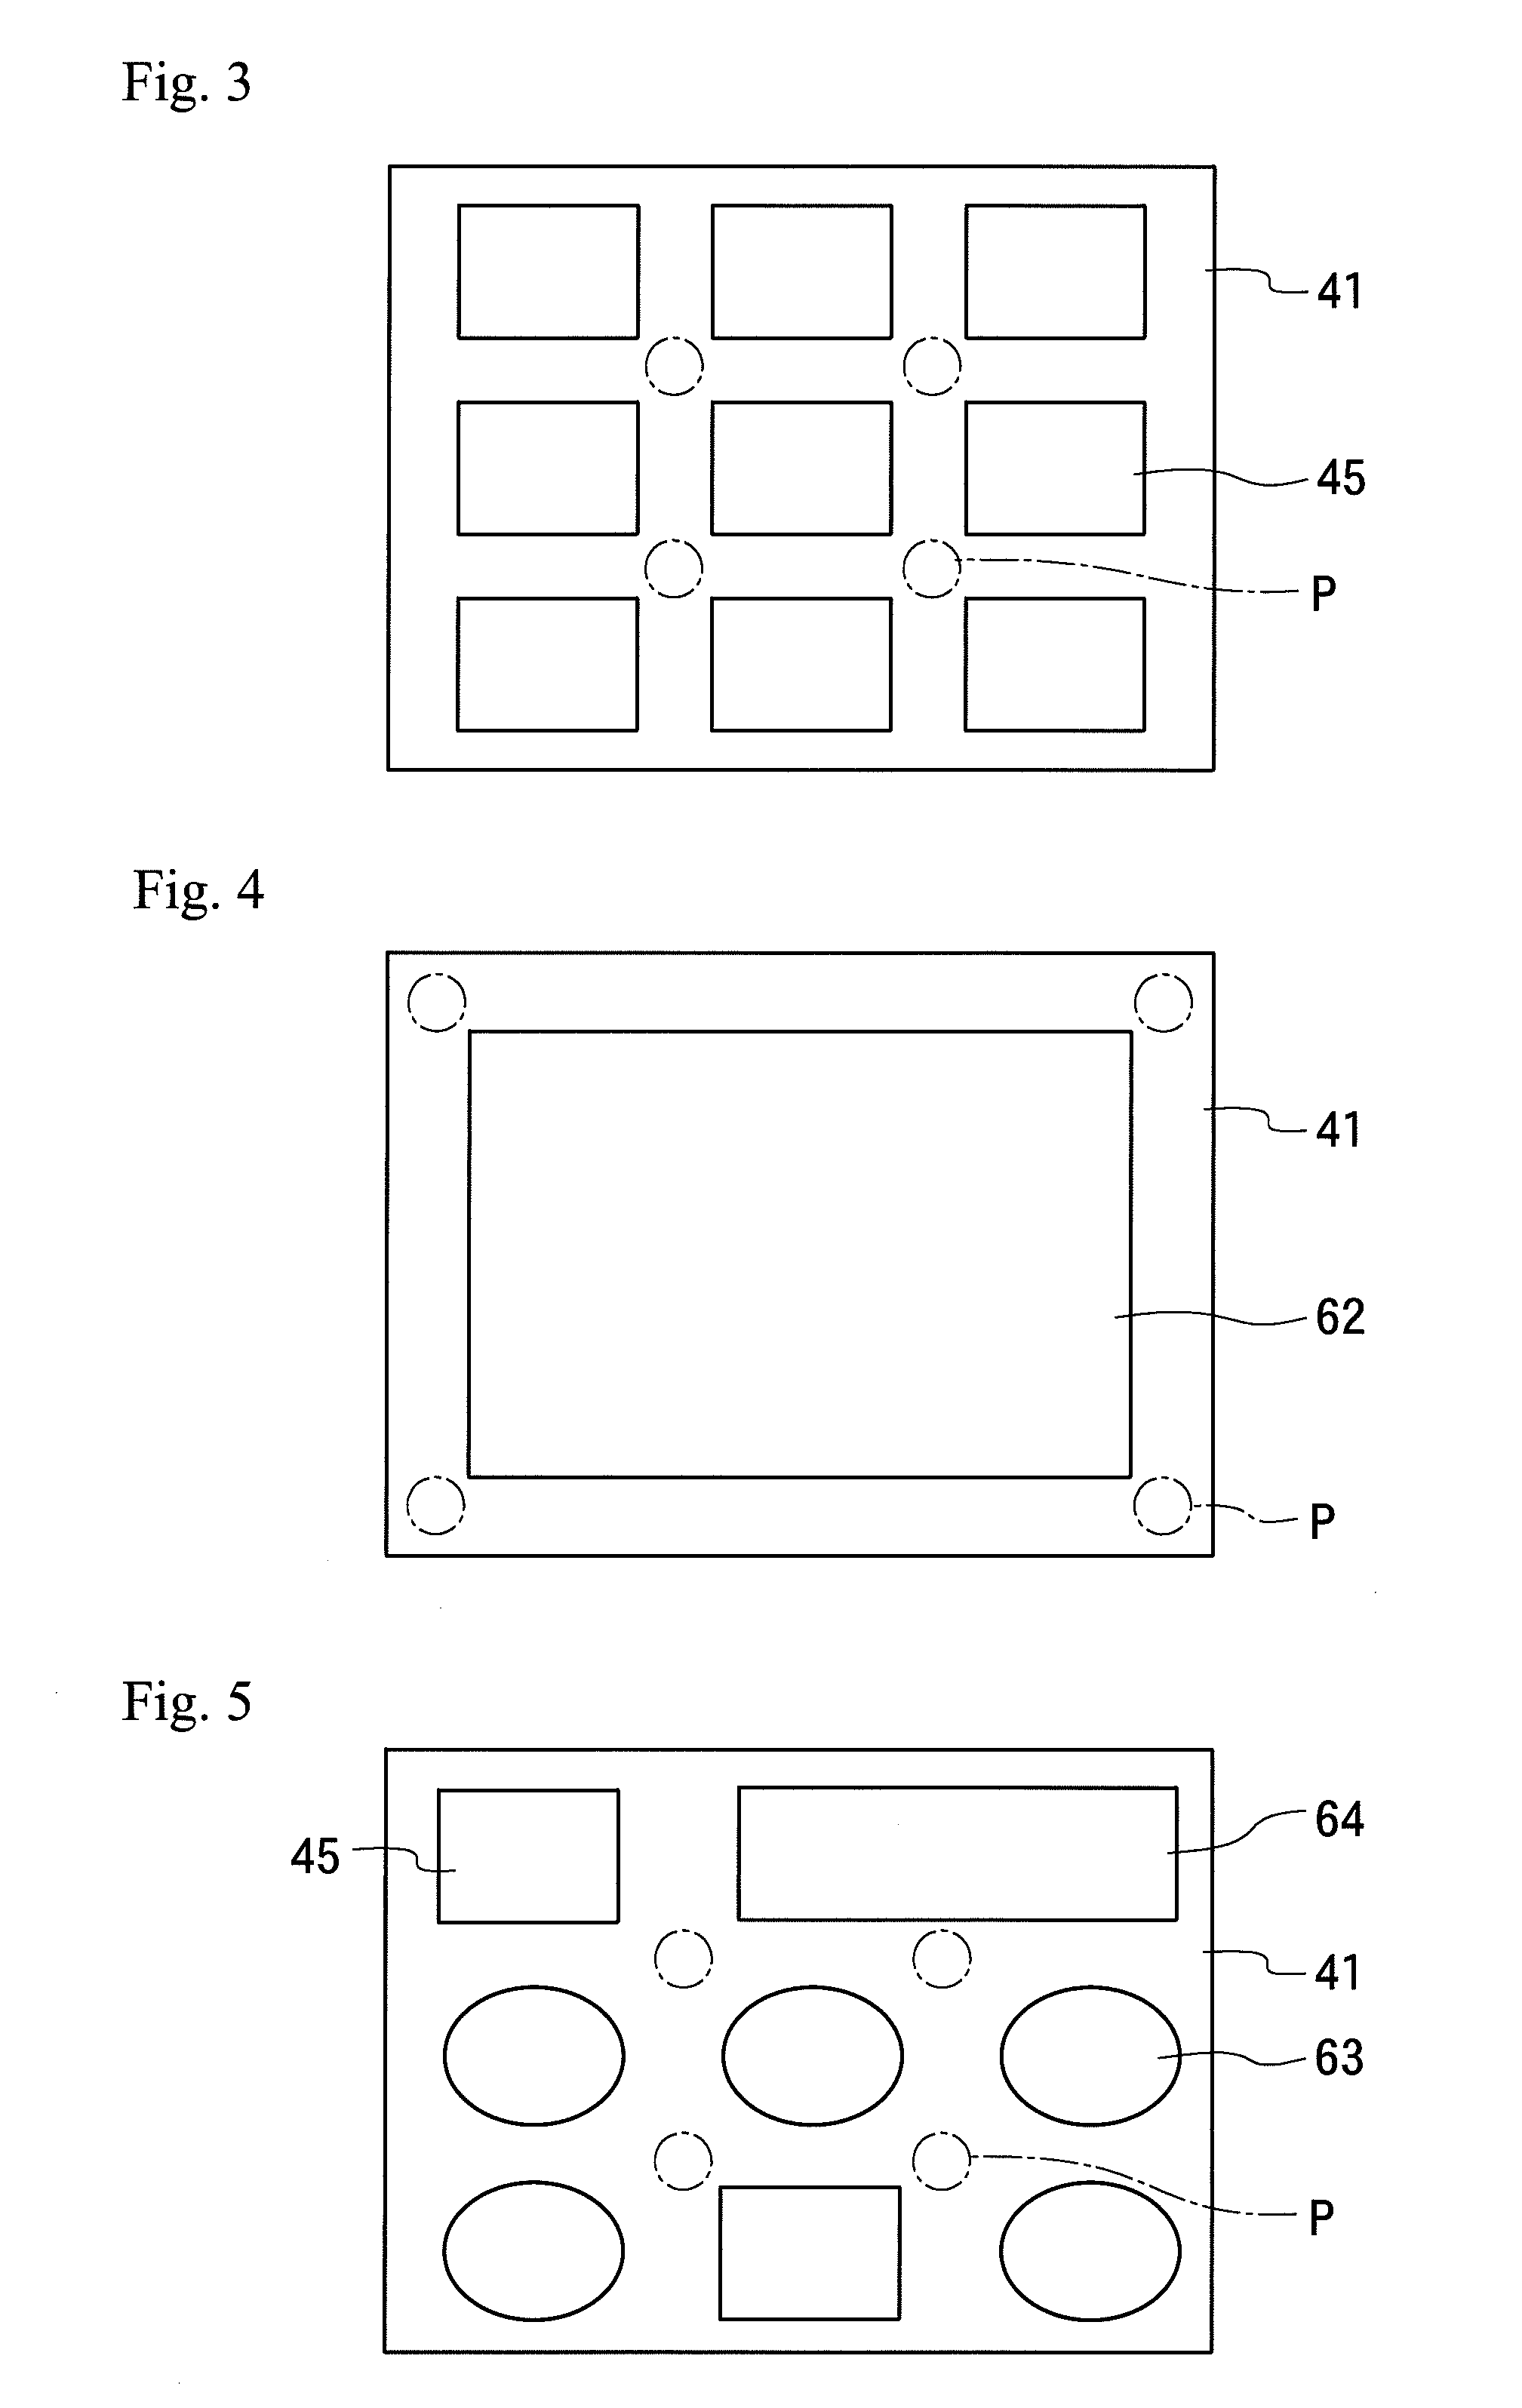 Substrate transfer processing apparatus